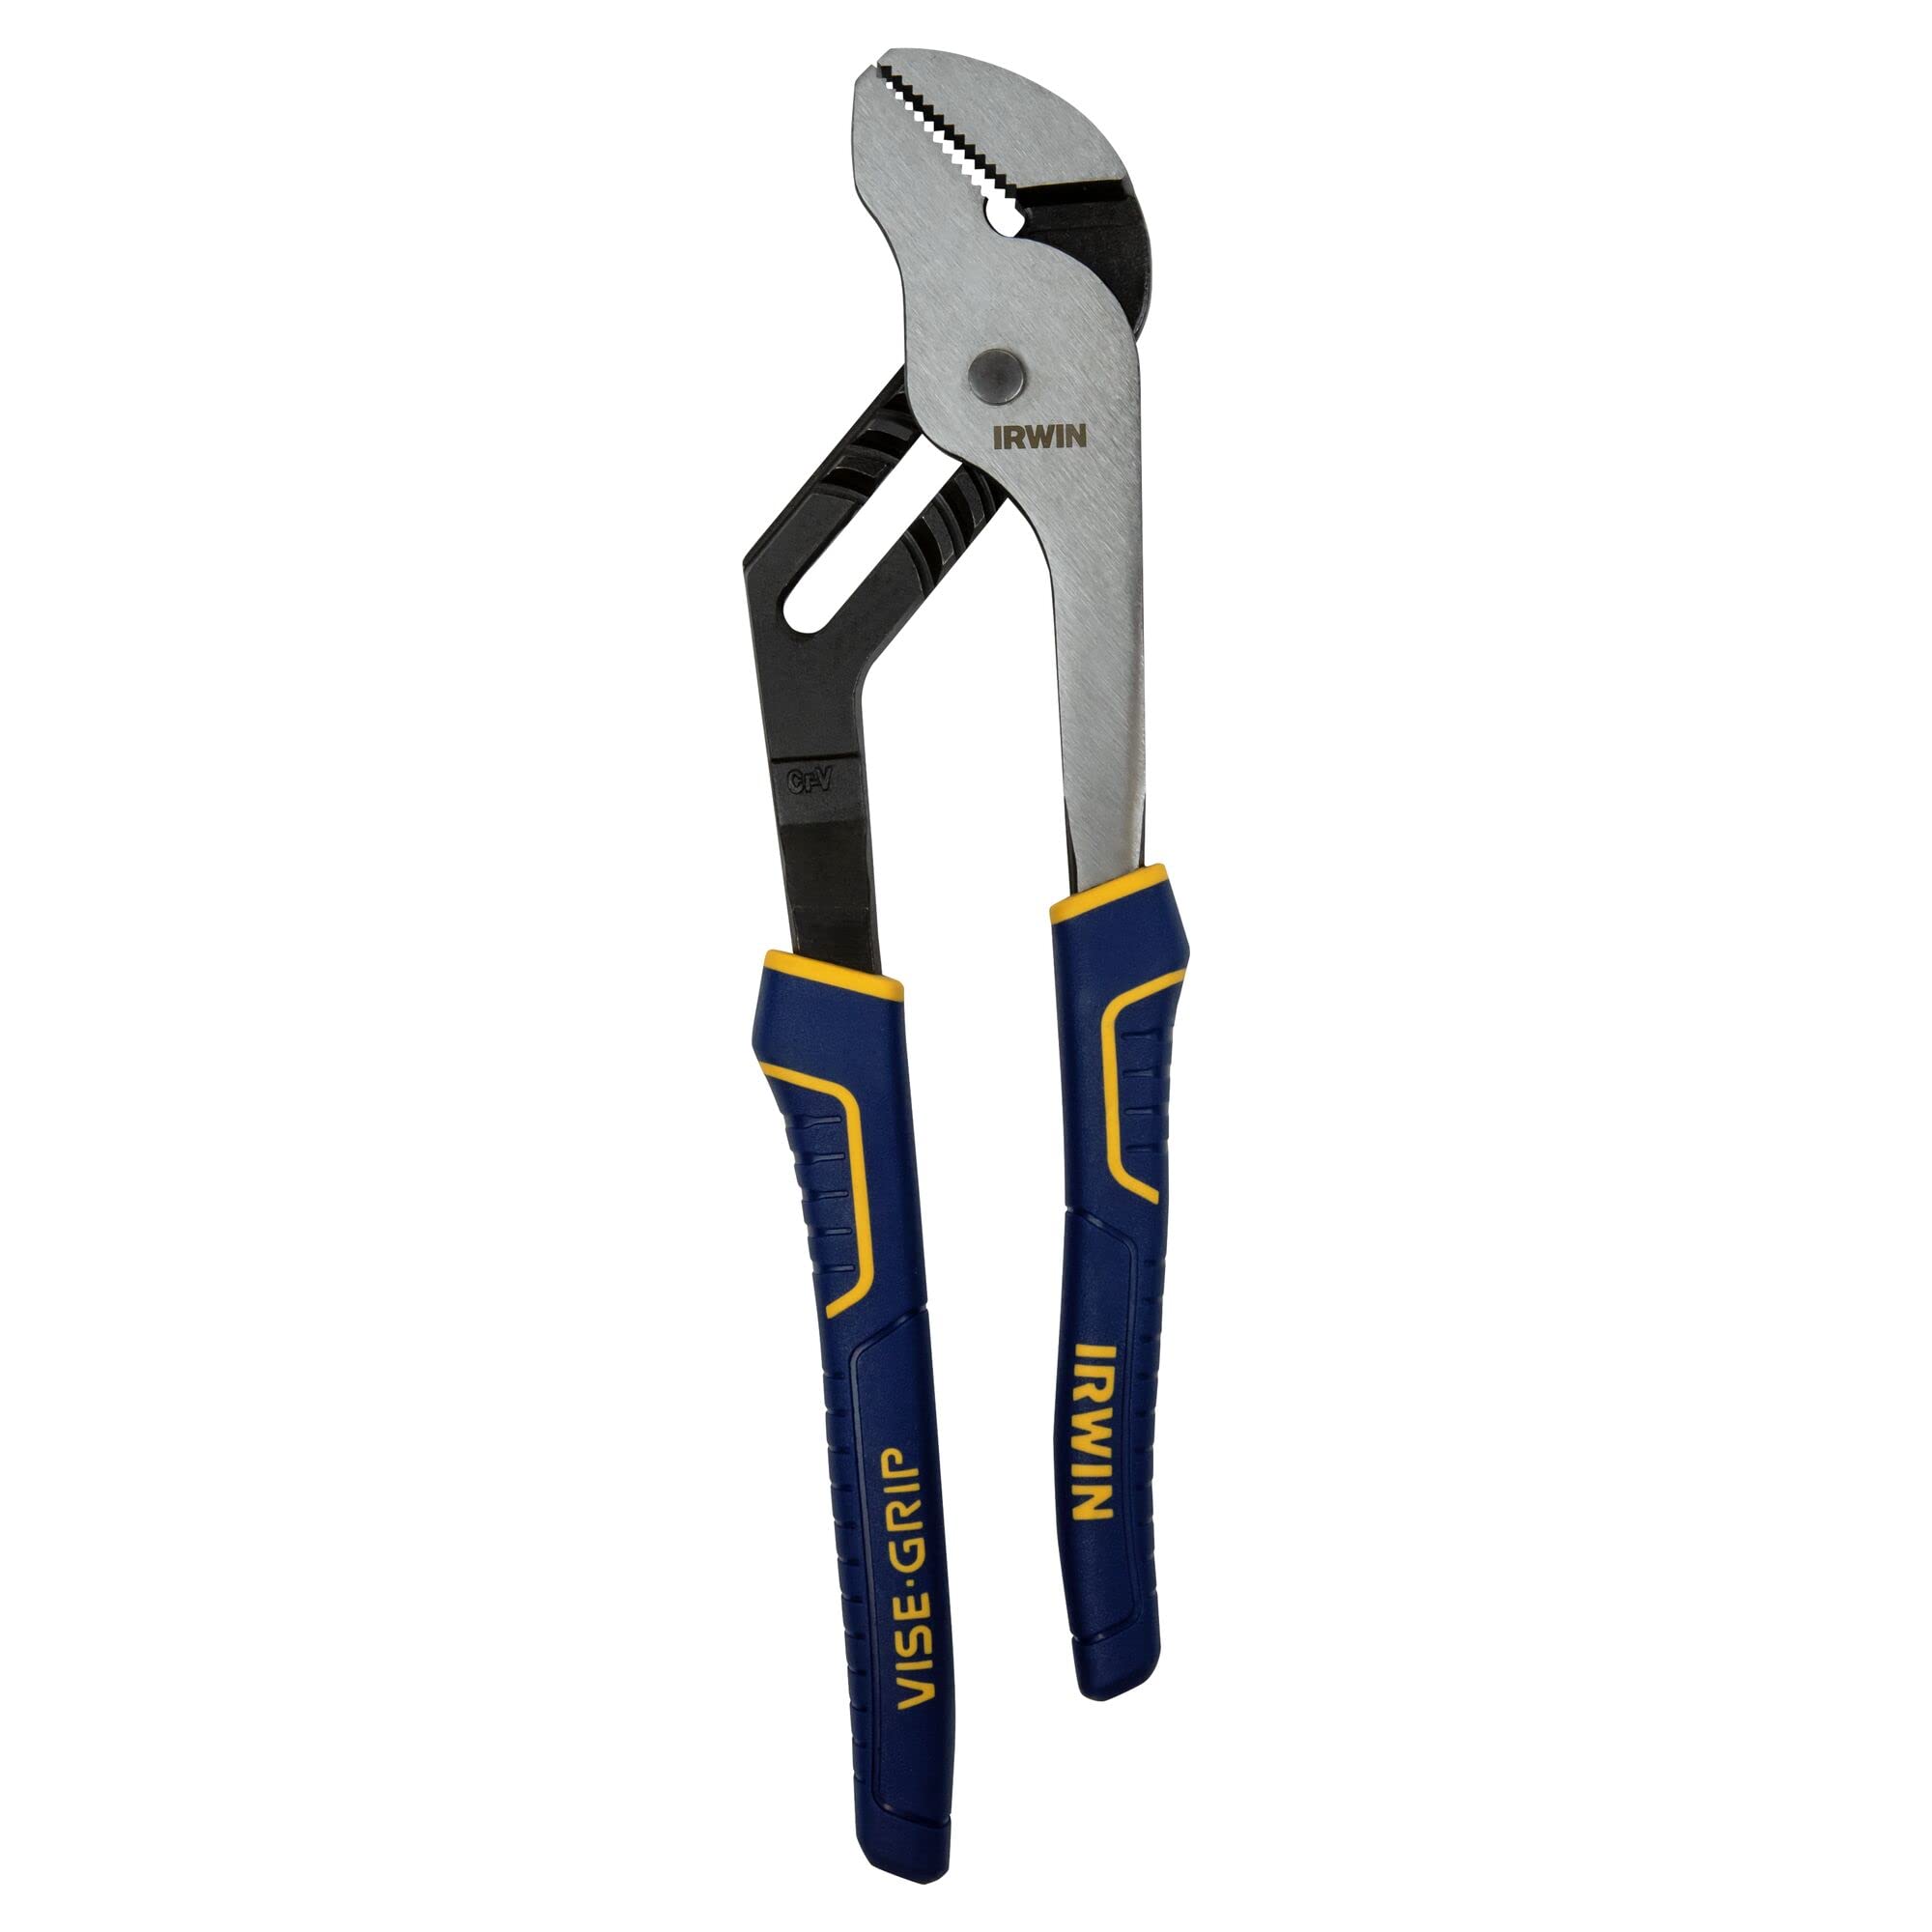 IRWIN GROOVE JOINT PLIERS 6"